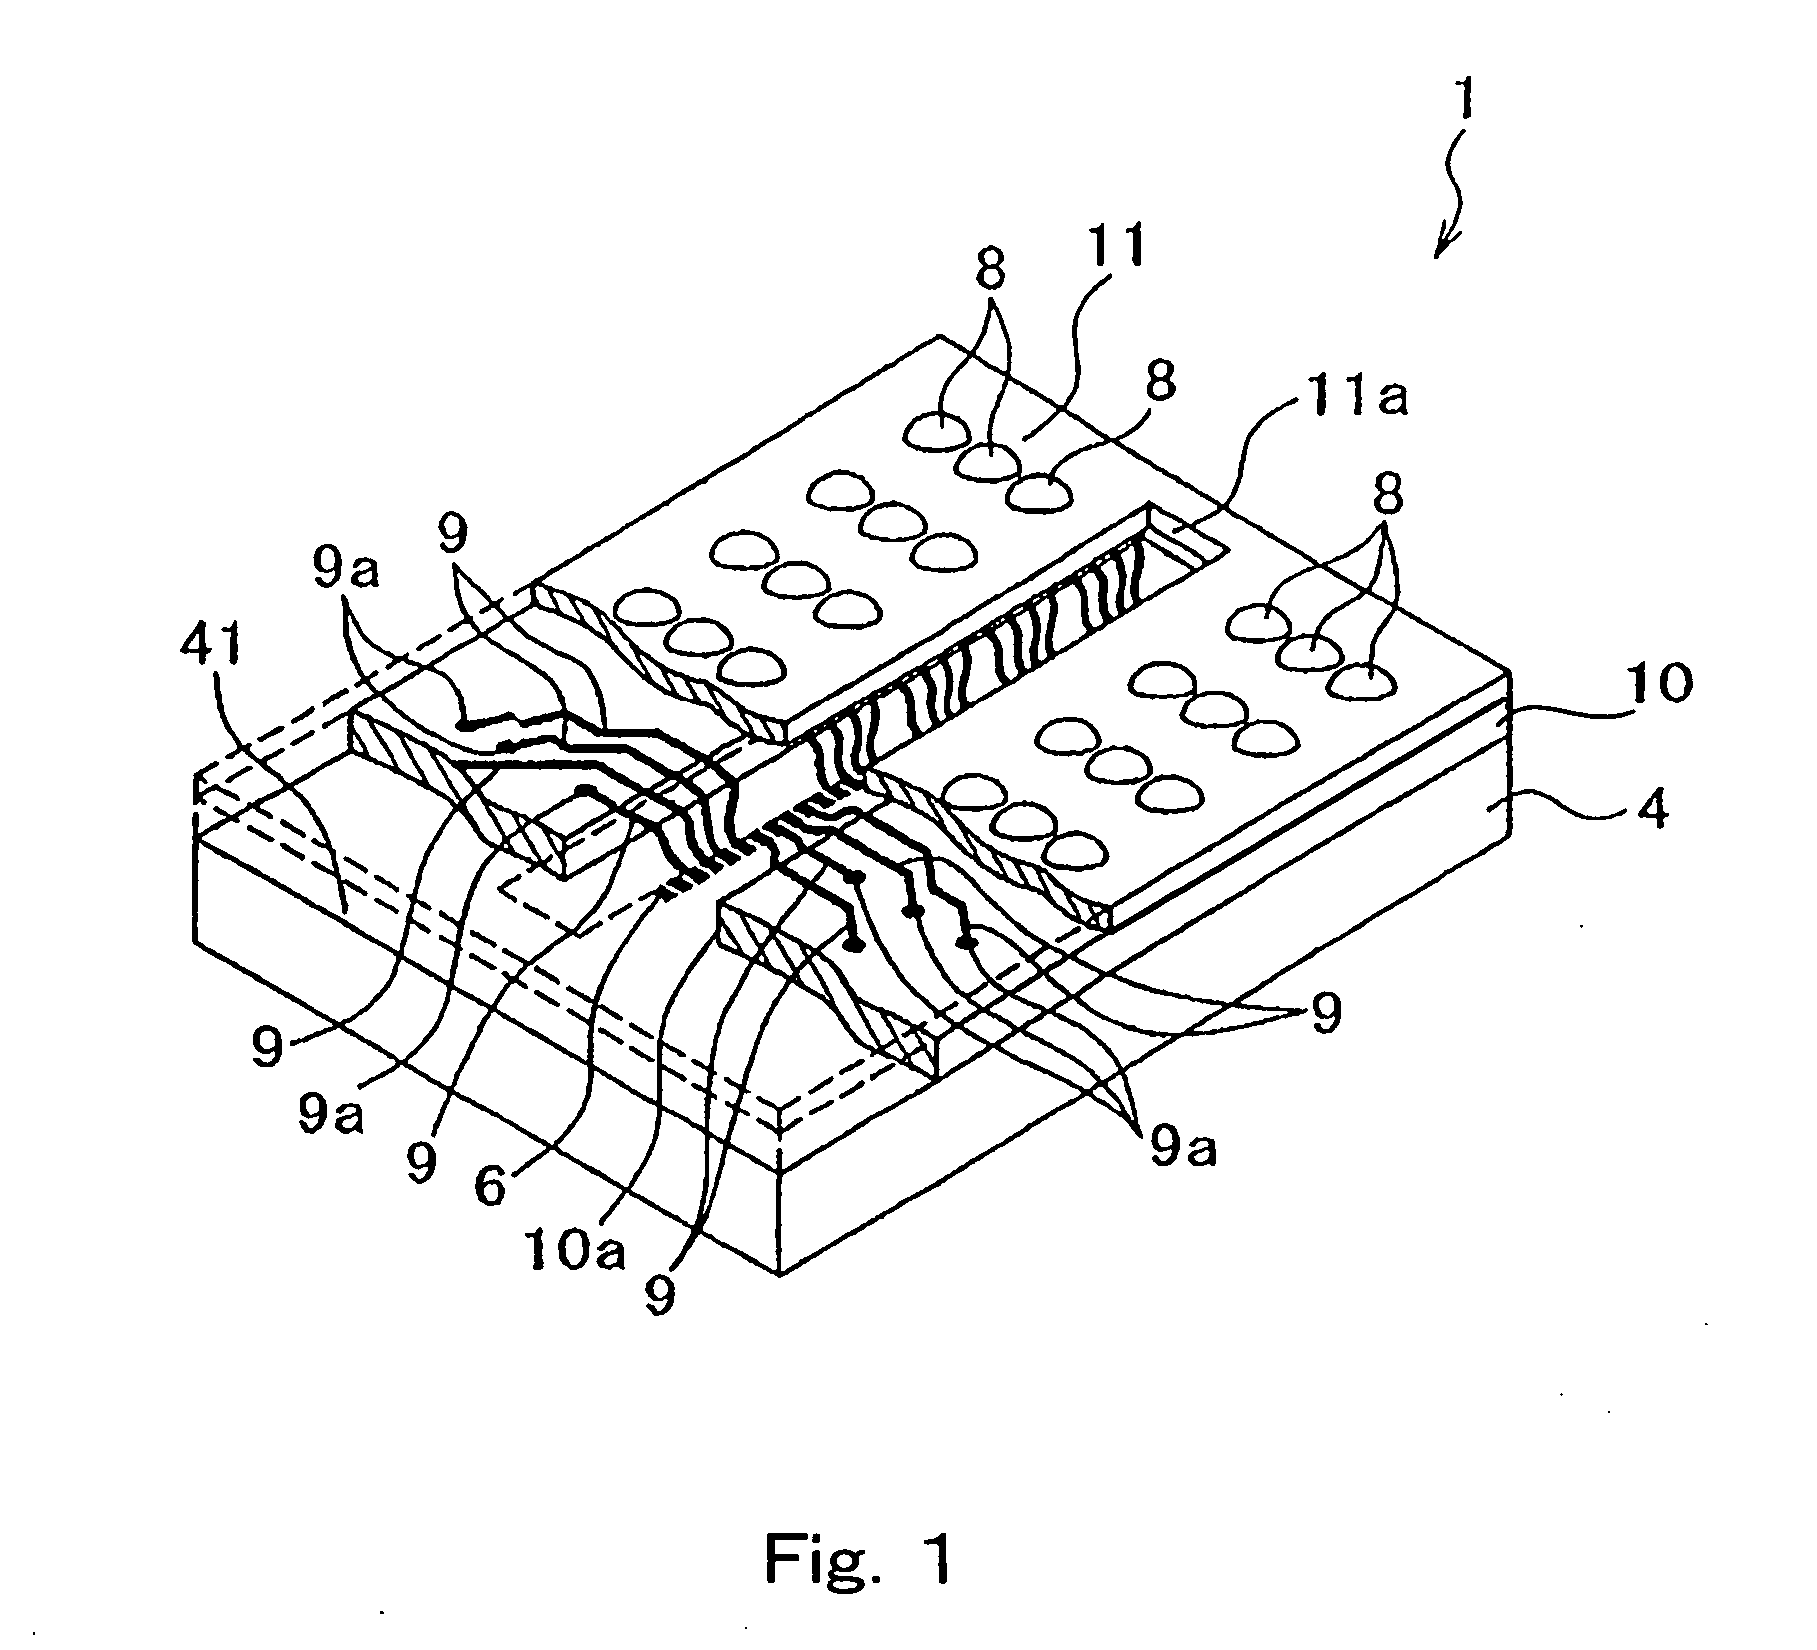 Fine pitch grid array type semiconductor device